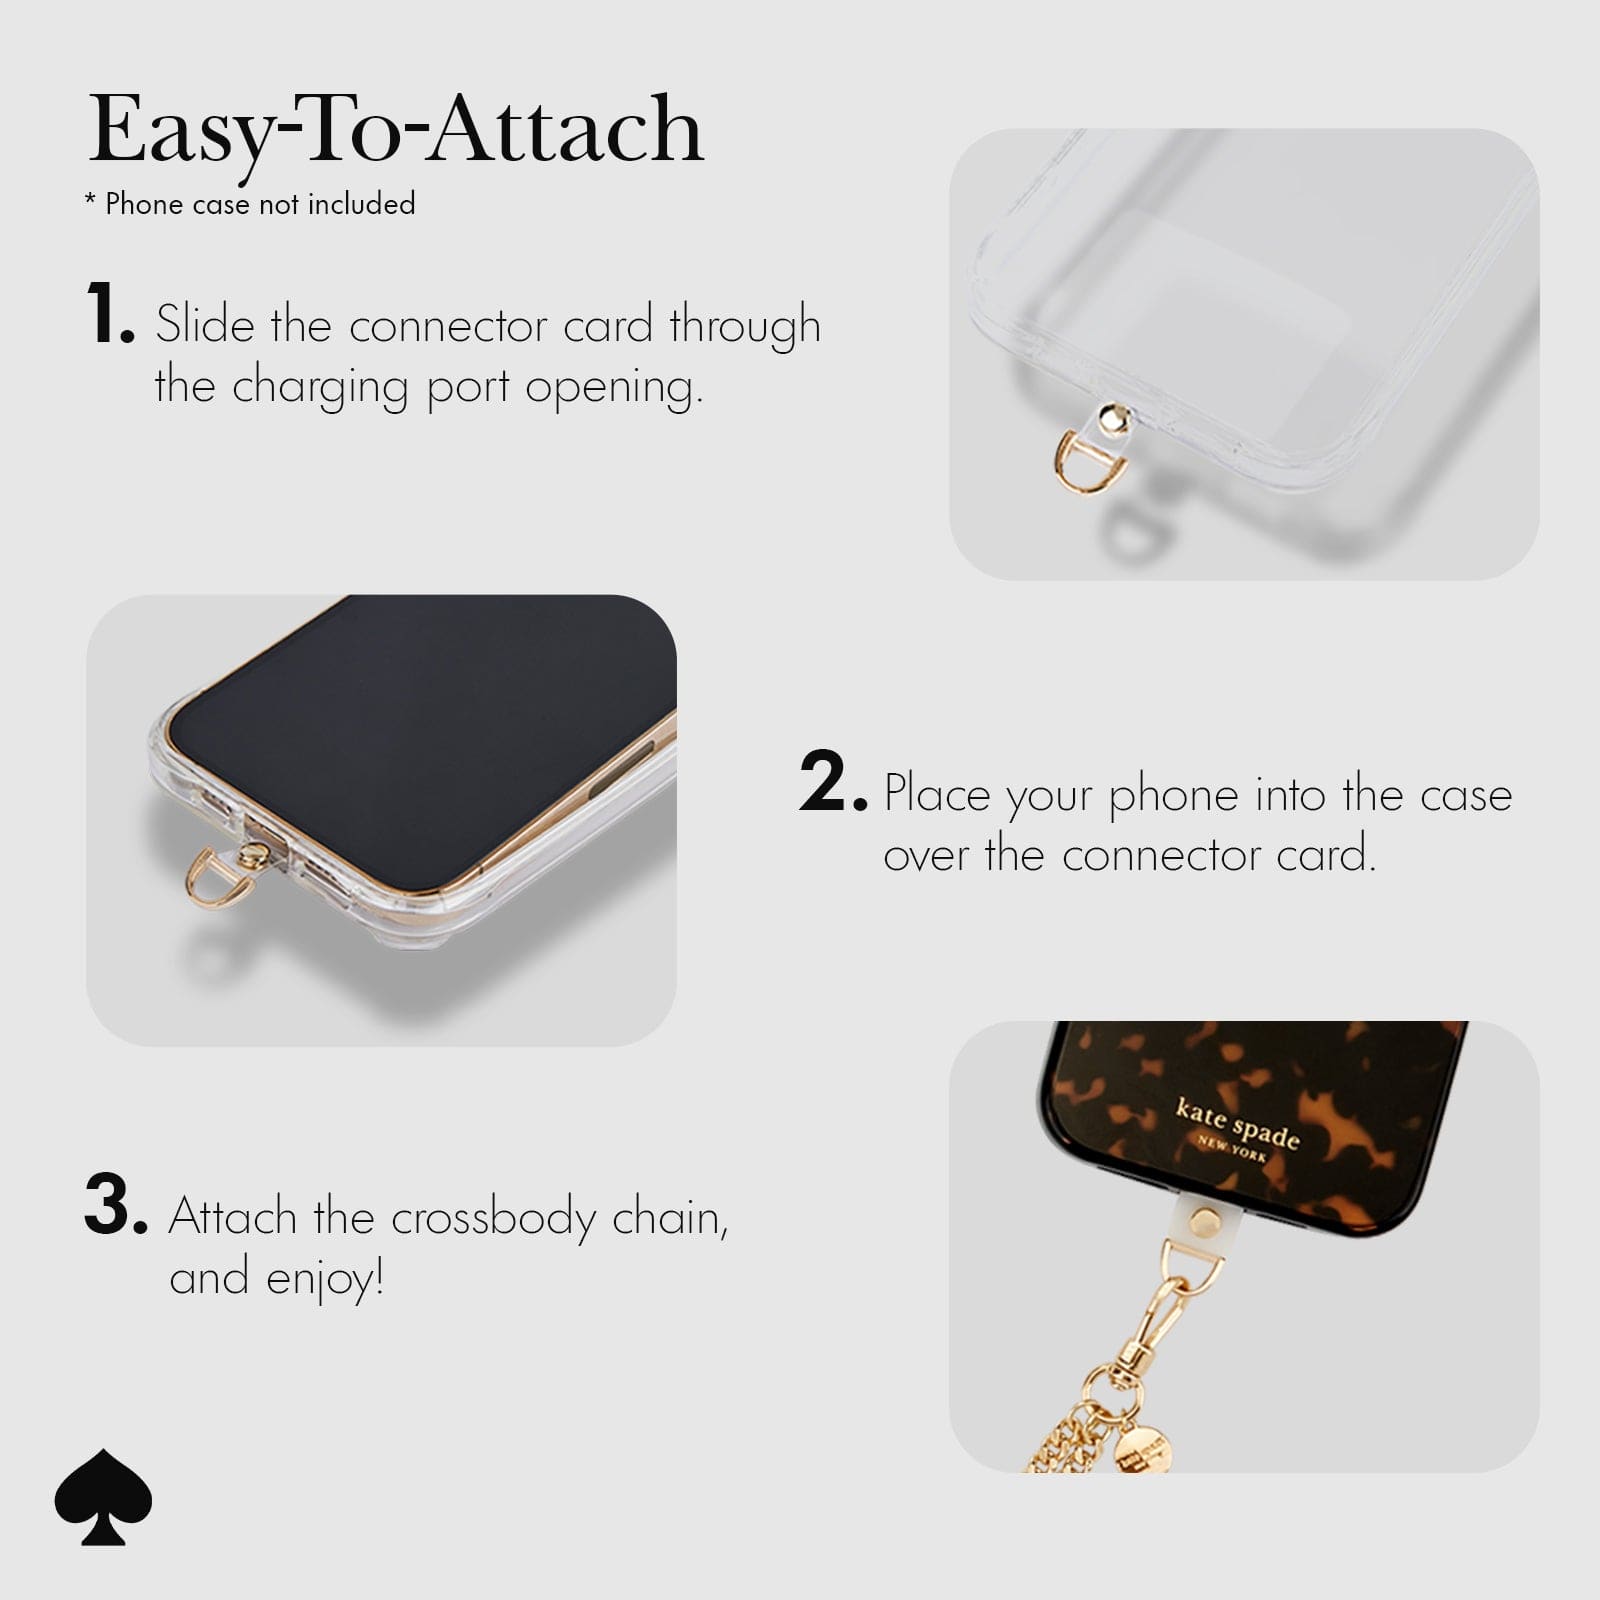 EASY TO ATTACH. SLIDE THE CONNECTOR CARD THROUGH THE CHARGING PORT OPENING. PLACE YOUR PHONE INTO THE CASE OVER THE CONNECTOR CARD. ATTACH THE CROSSBODY CHAIN AND ENJOY!